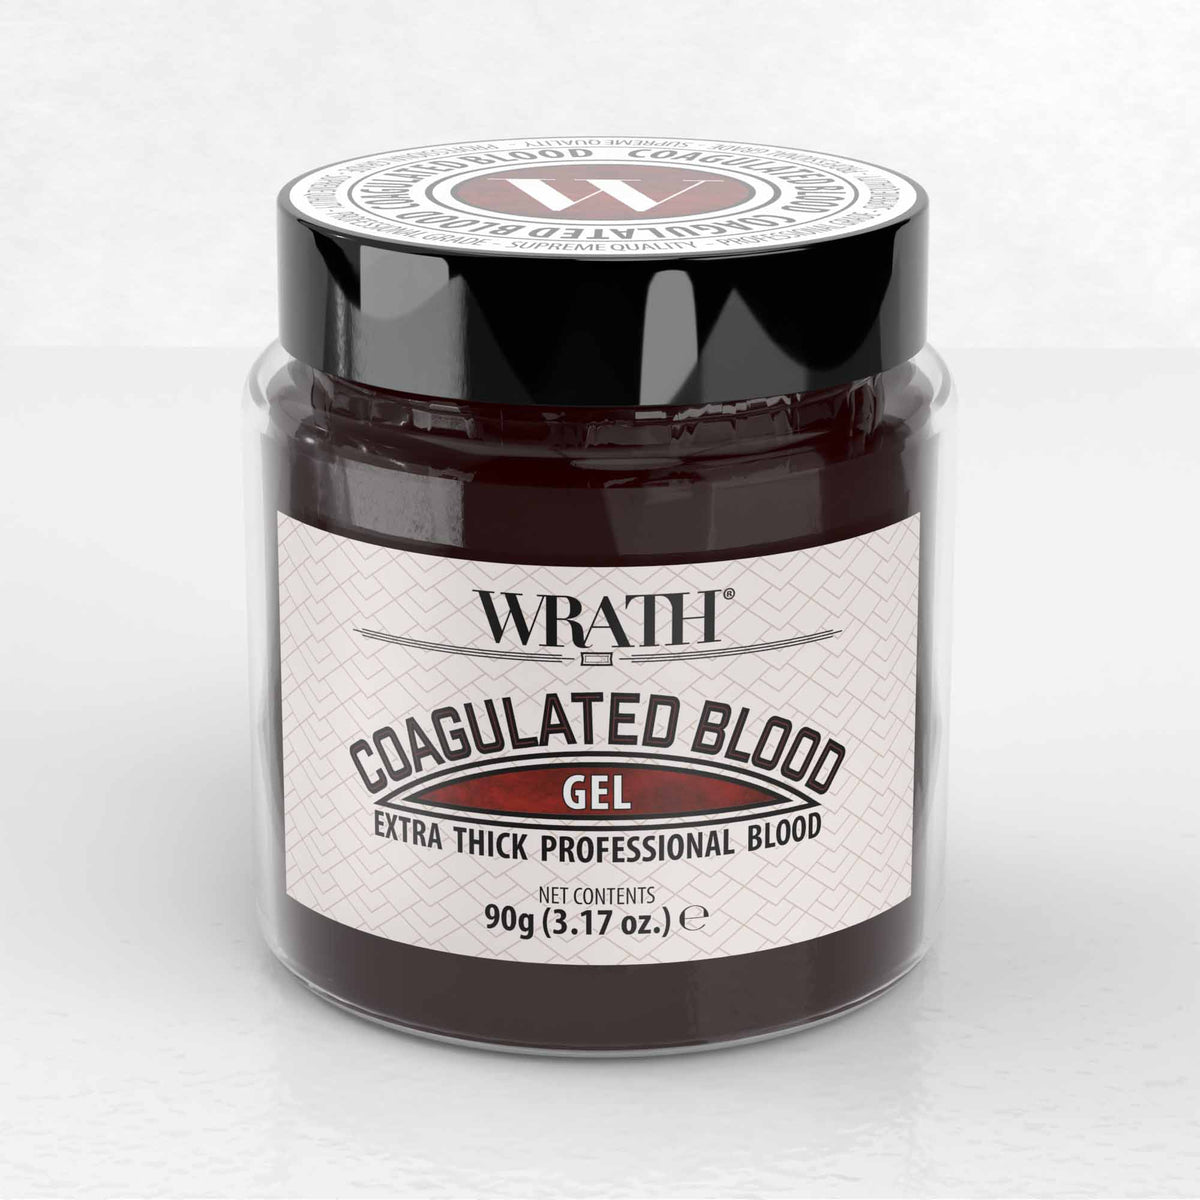 WRATH Coagulated Blood - Thick Professional Gel